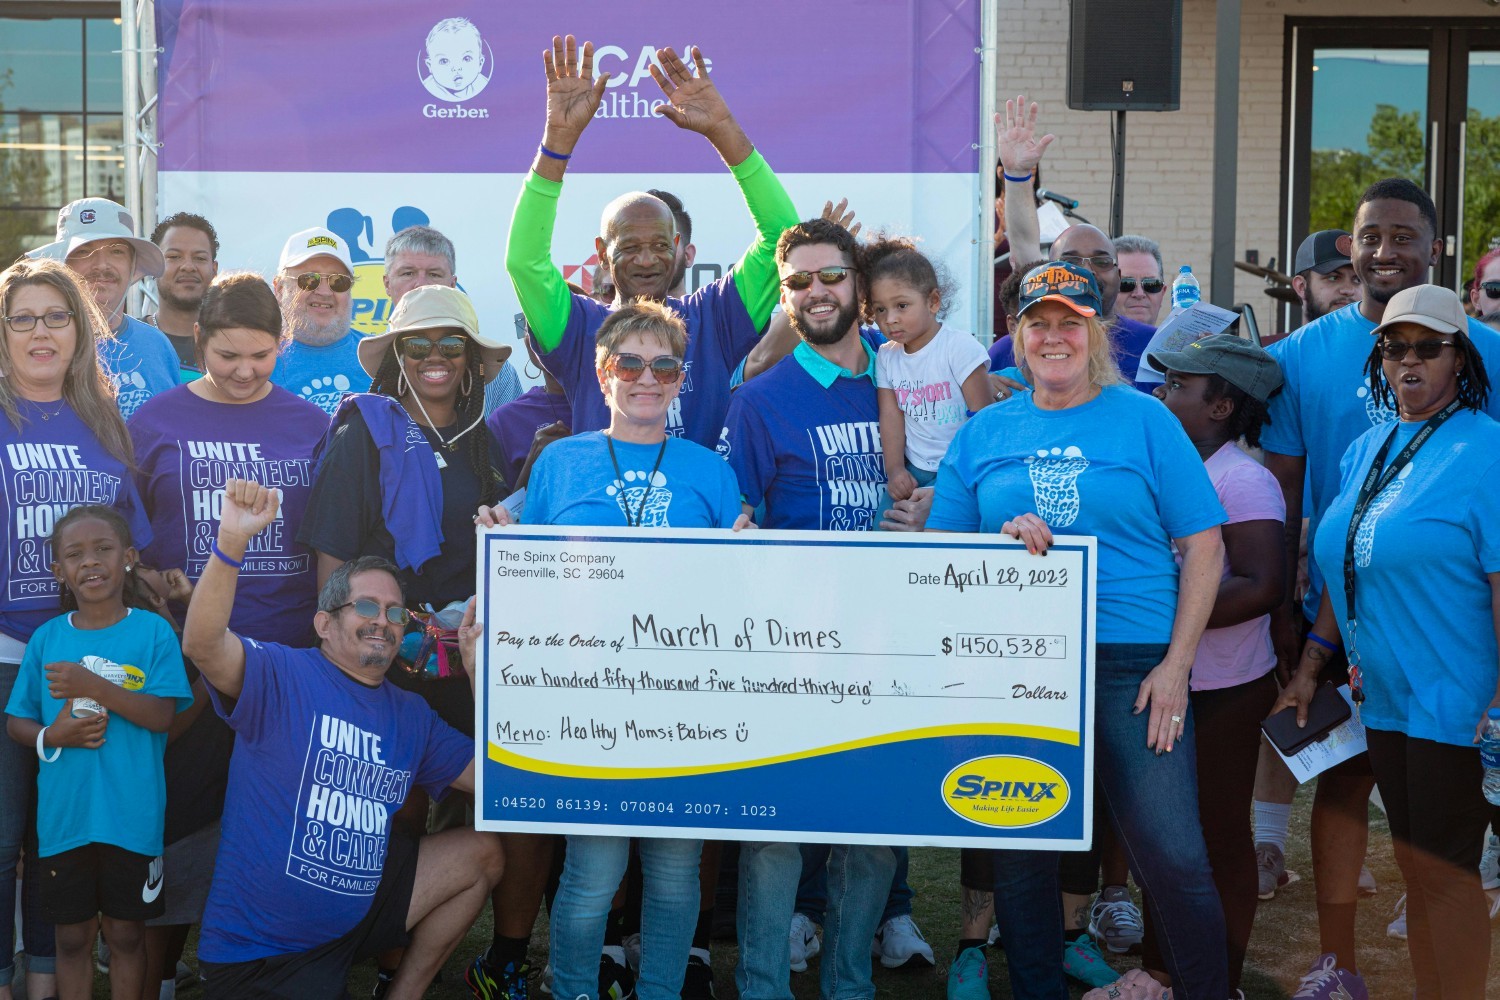 Spinx Company is the largest fundraiser for the local March of Dimes